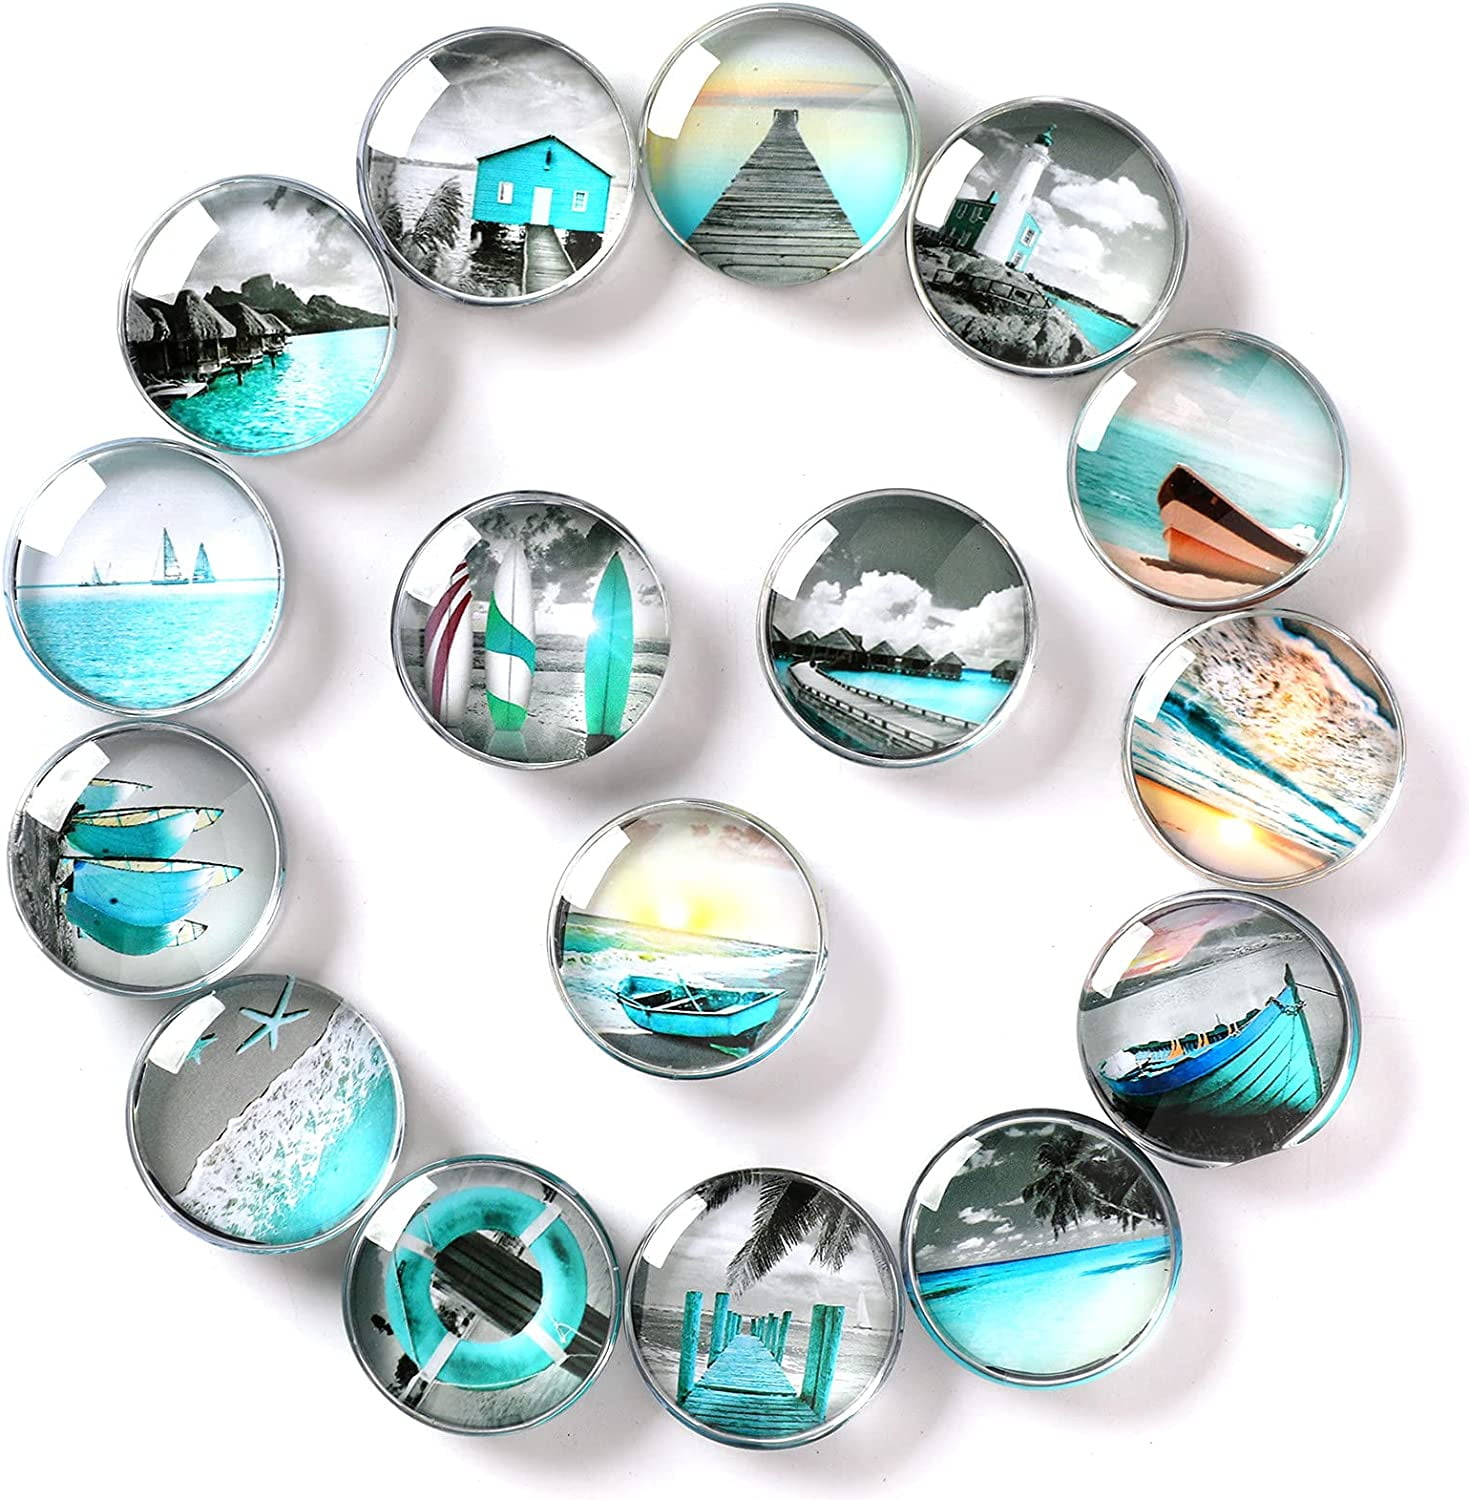 Whiteboard Crystal Glass Beach View Pattern Fridge Magnets for Home Office Cabinet Photos,Party Holiday Decorative Magnet Gift 16pcs Refrigerator Magnets